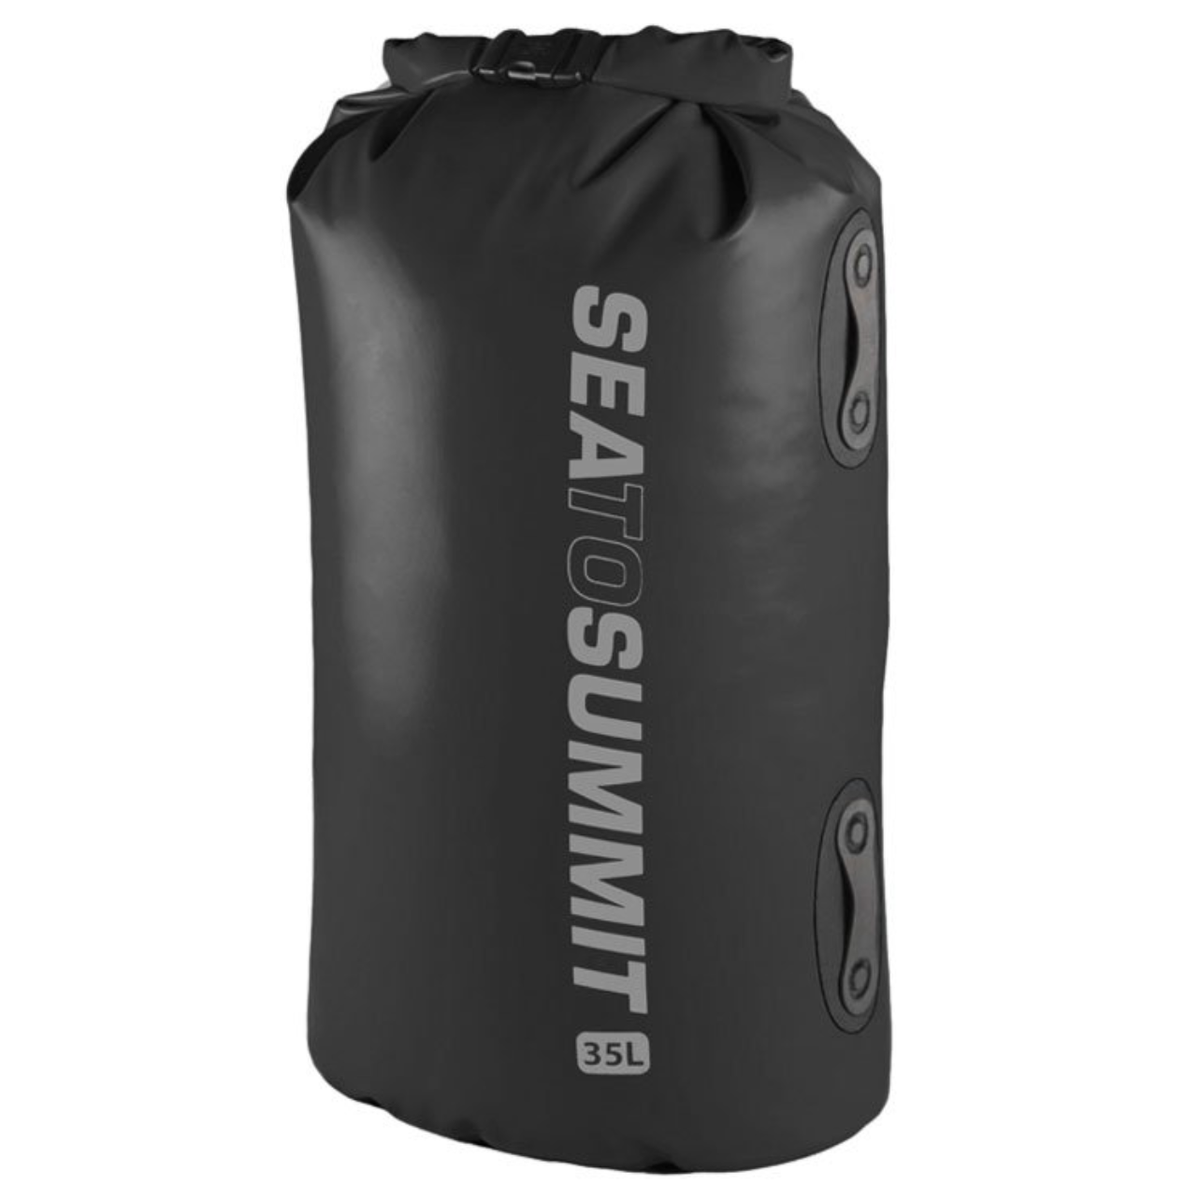 Free Gear Fridays: Sea to Summit Hydraulic Dry Pack & Bag Giveaway |  GearJunkie